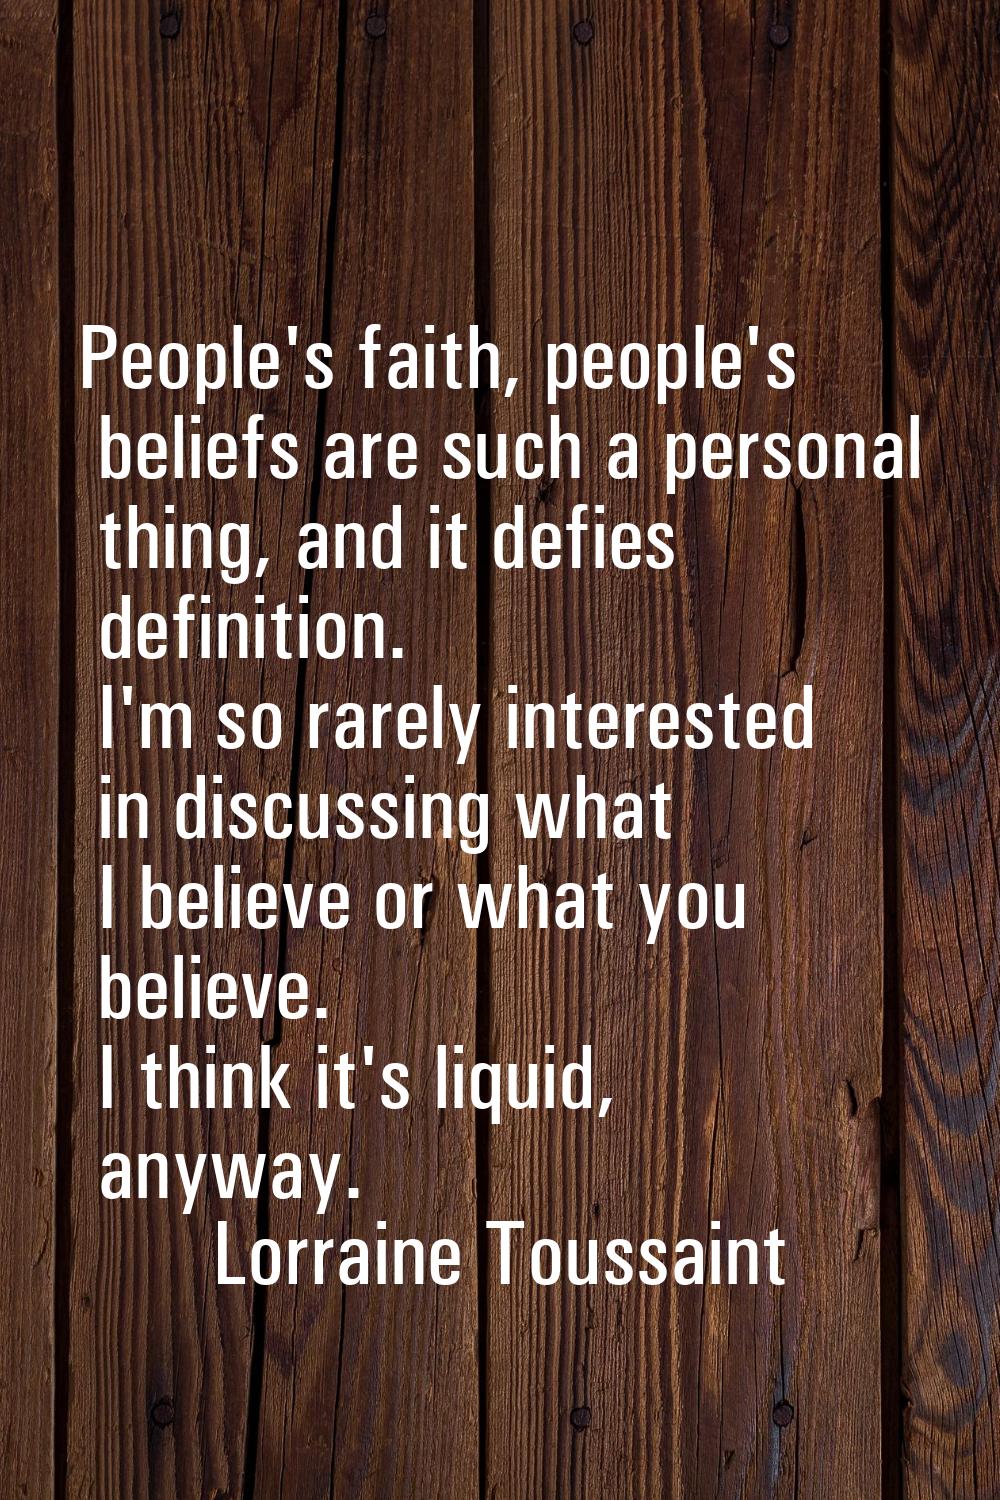 People's faith, people's beliefs are such a personal thing, and it defies definition. I'm so rarely